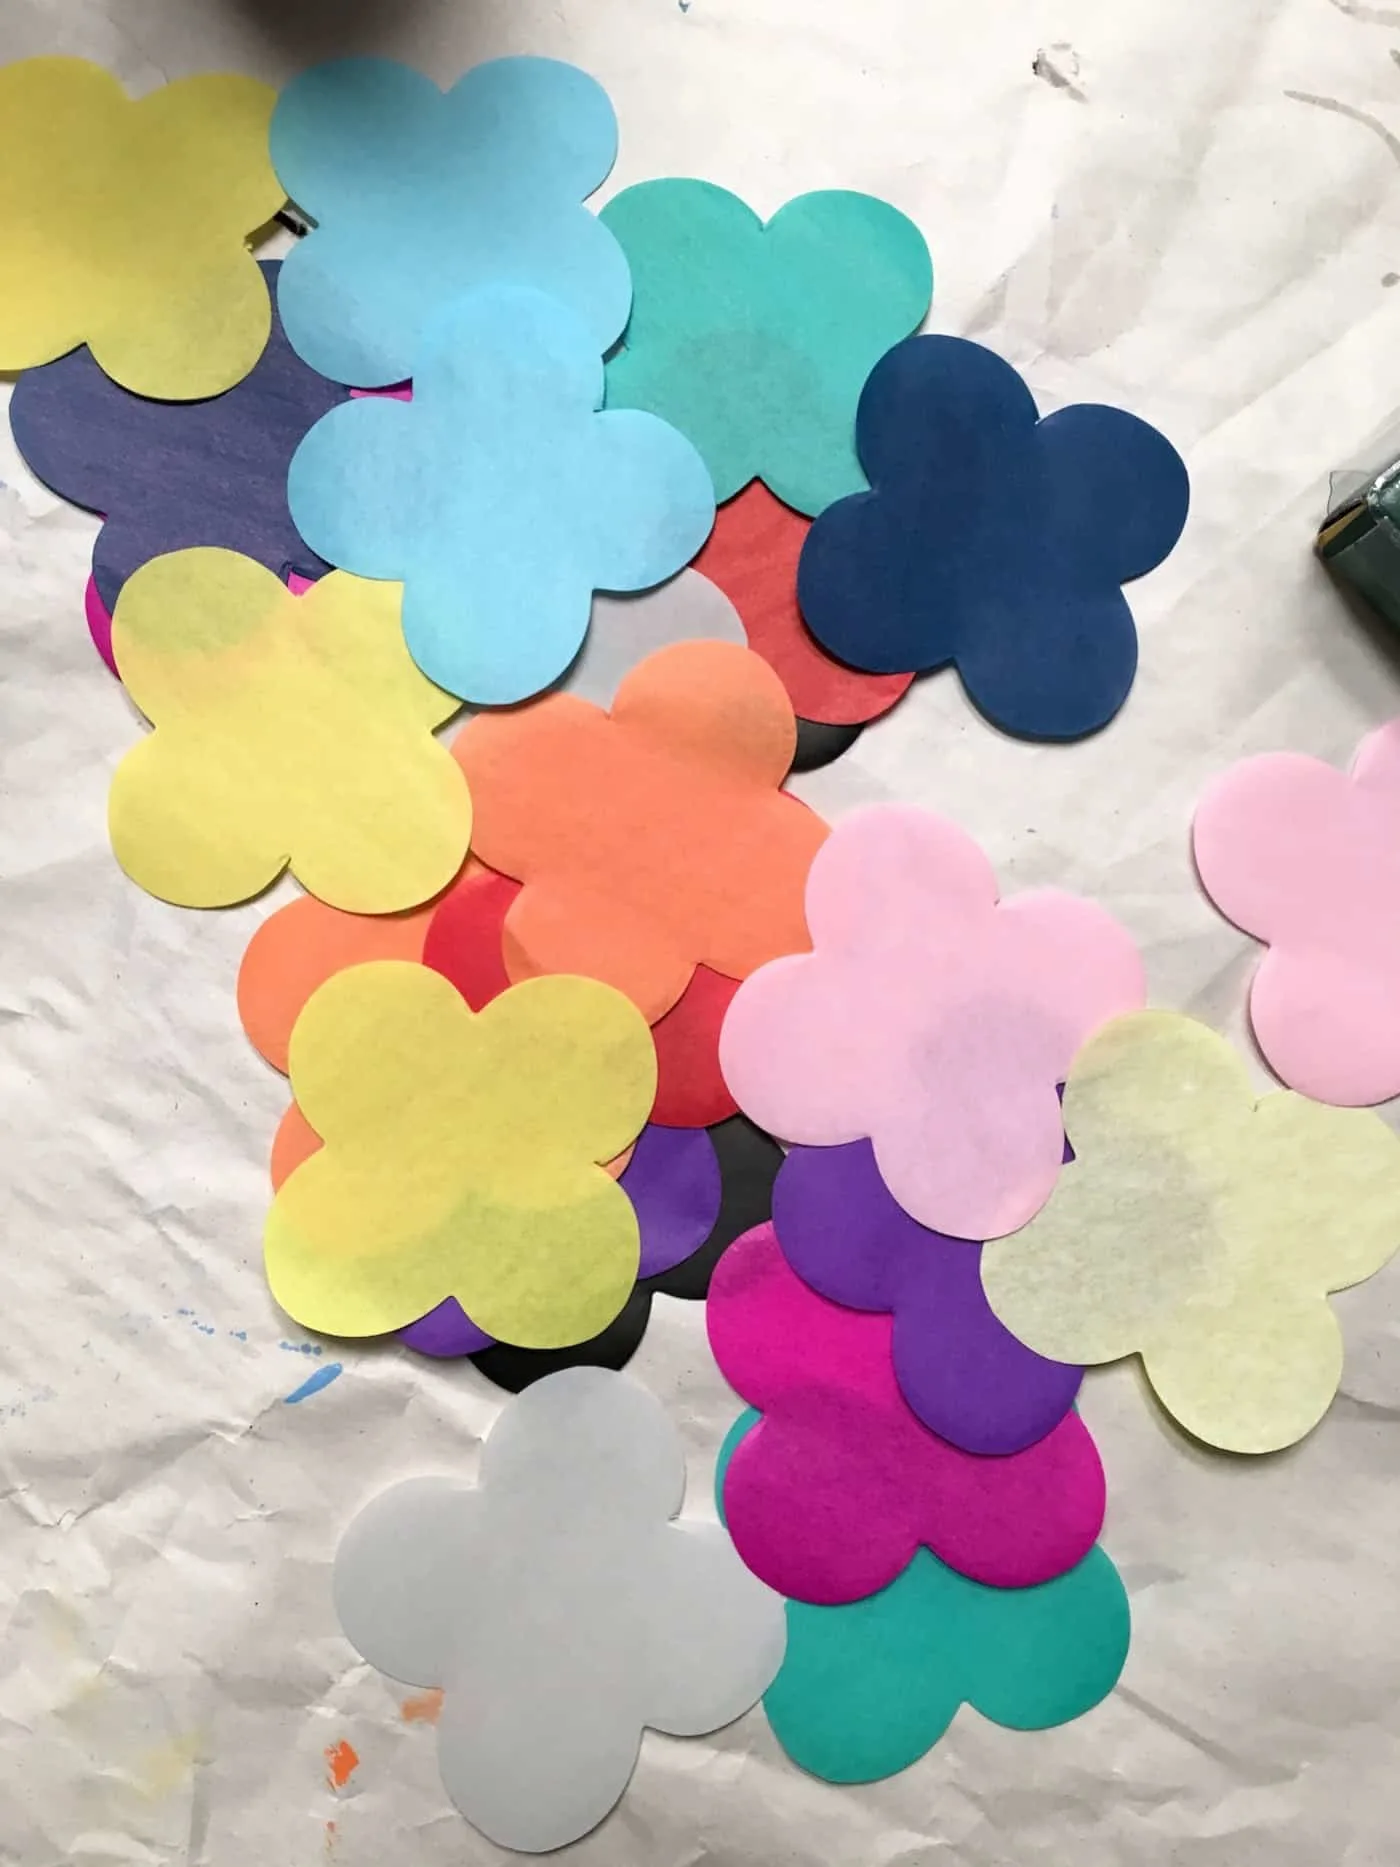 Tissue paper floral pieces in multiple colors